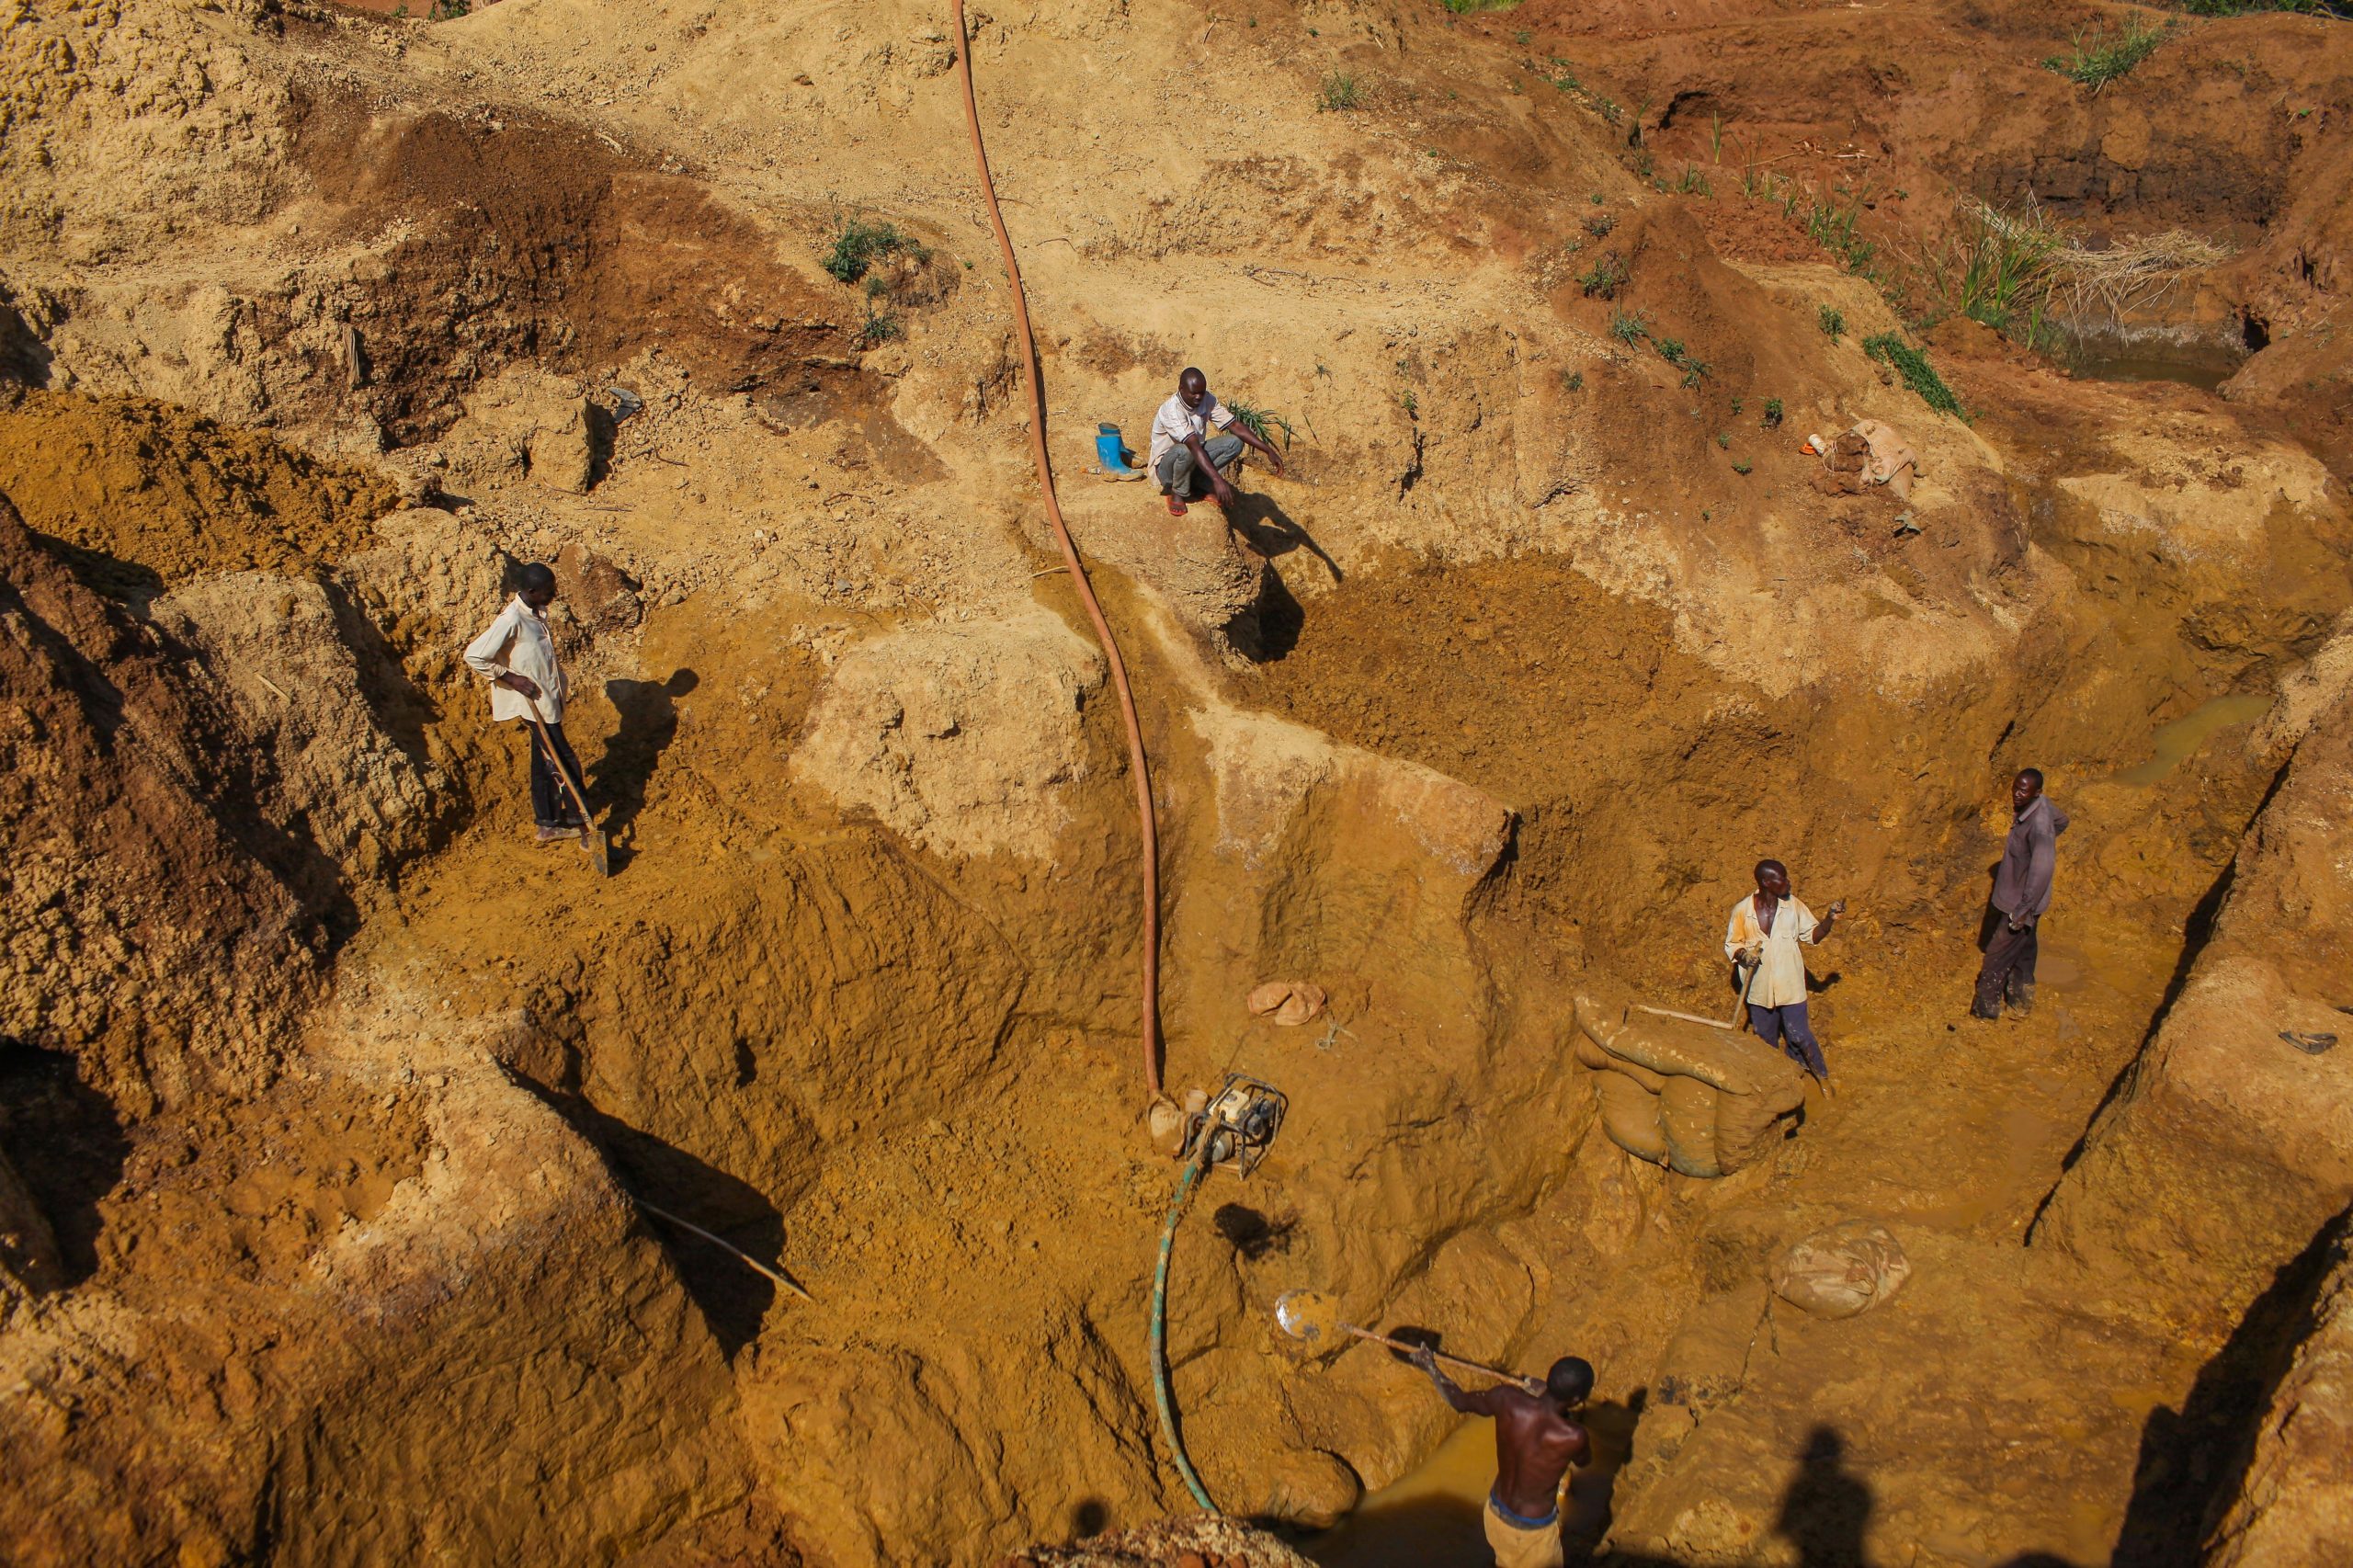 A Future For Mining In The DRC: The Role of Responsible Security